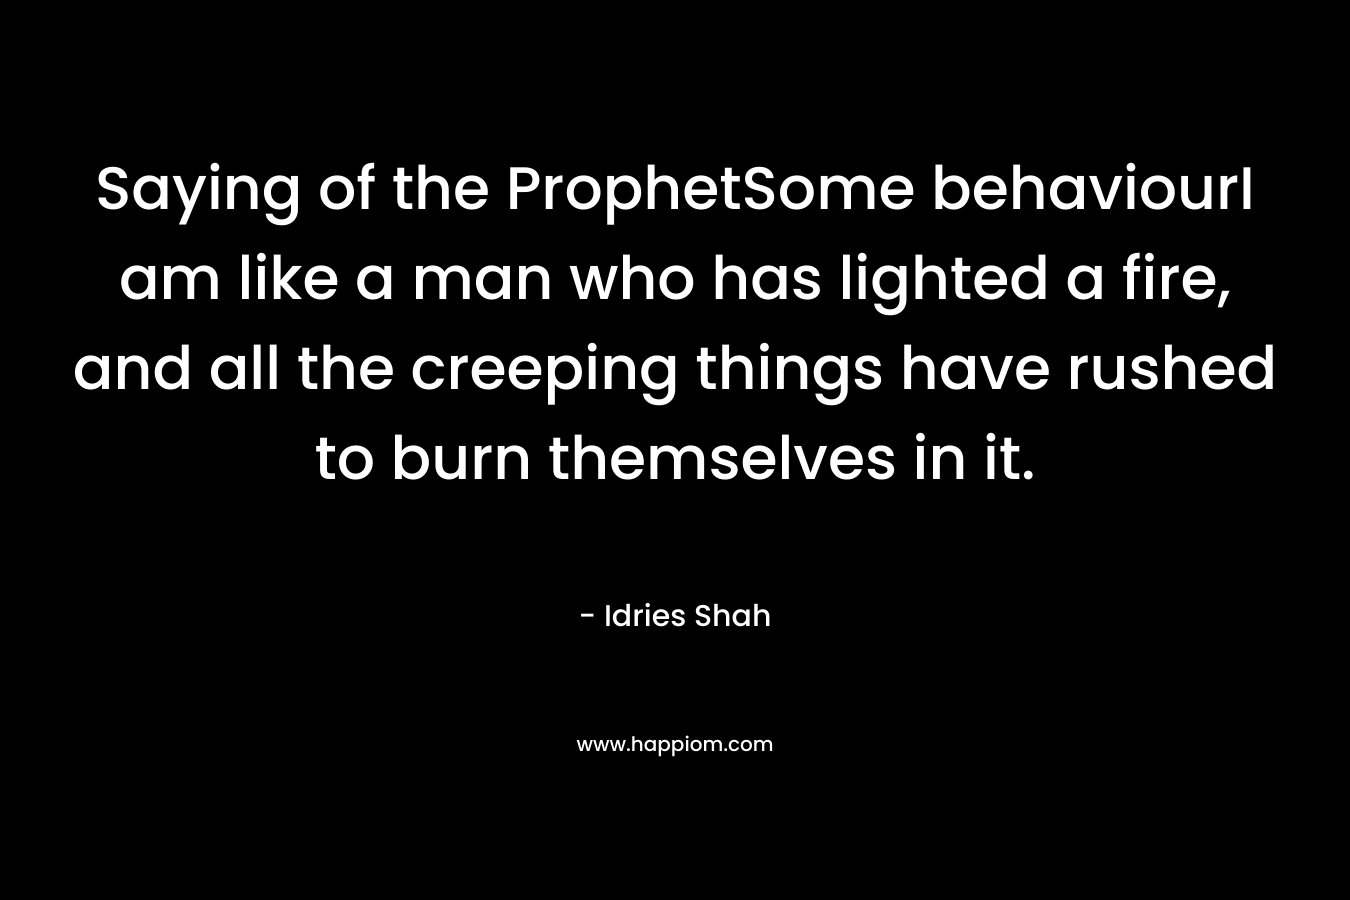 Saying of the ProphetSome behaviourI am like a man who has lighted a fire, and all the creeping things have rushed to burn themselves in it.